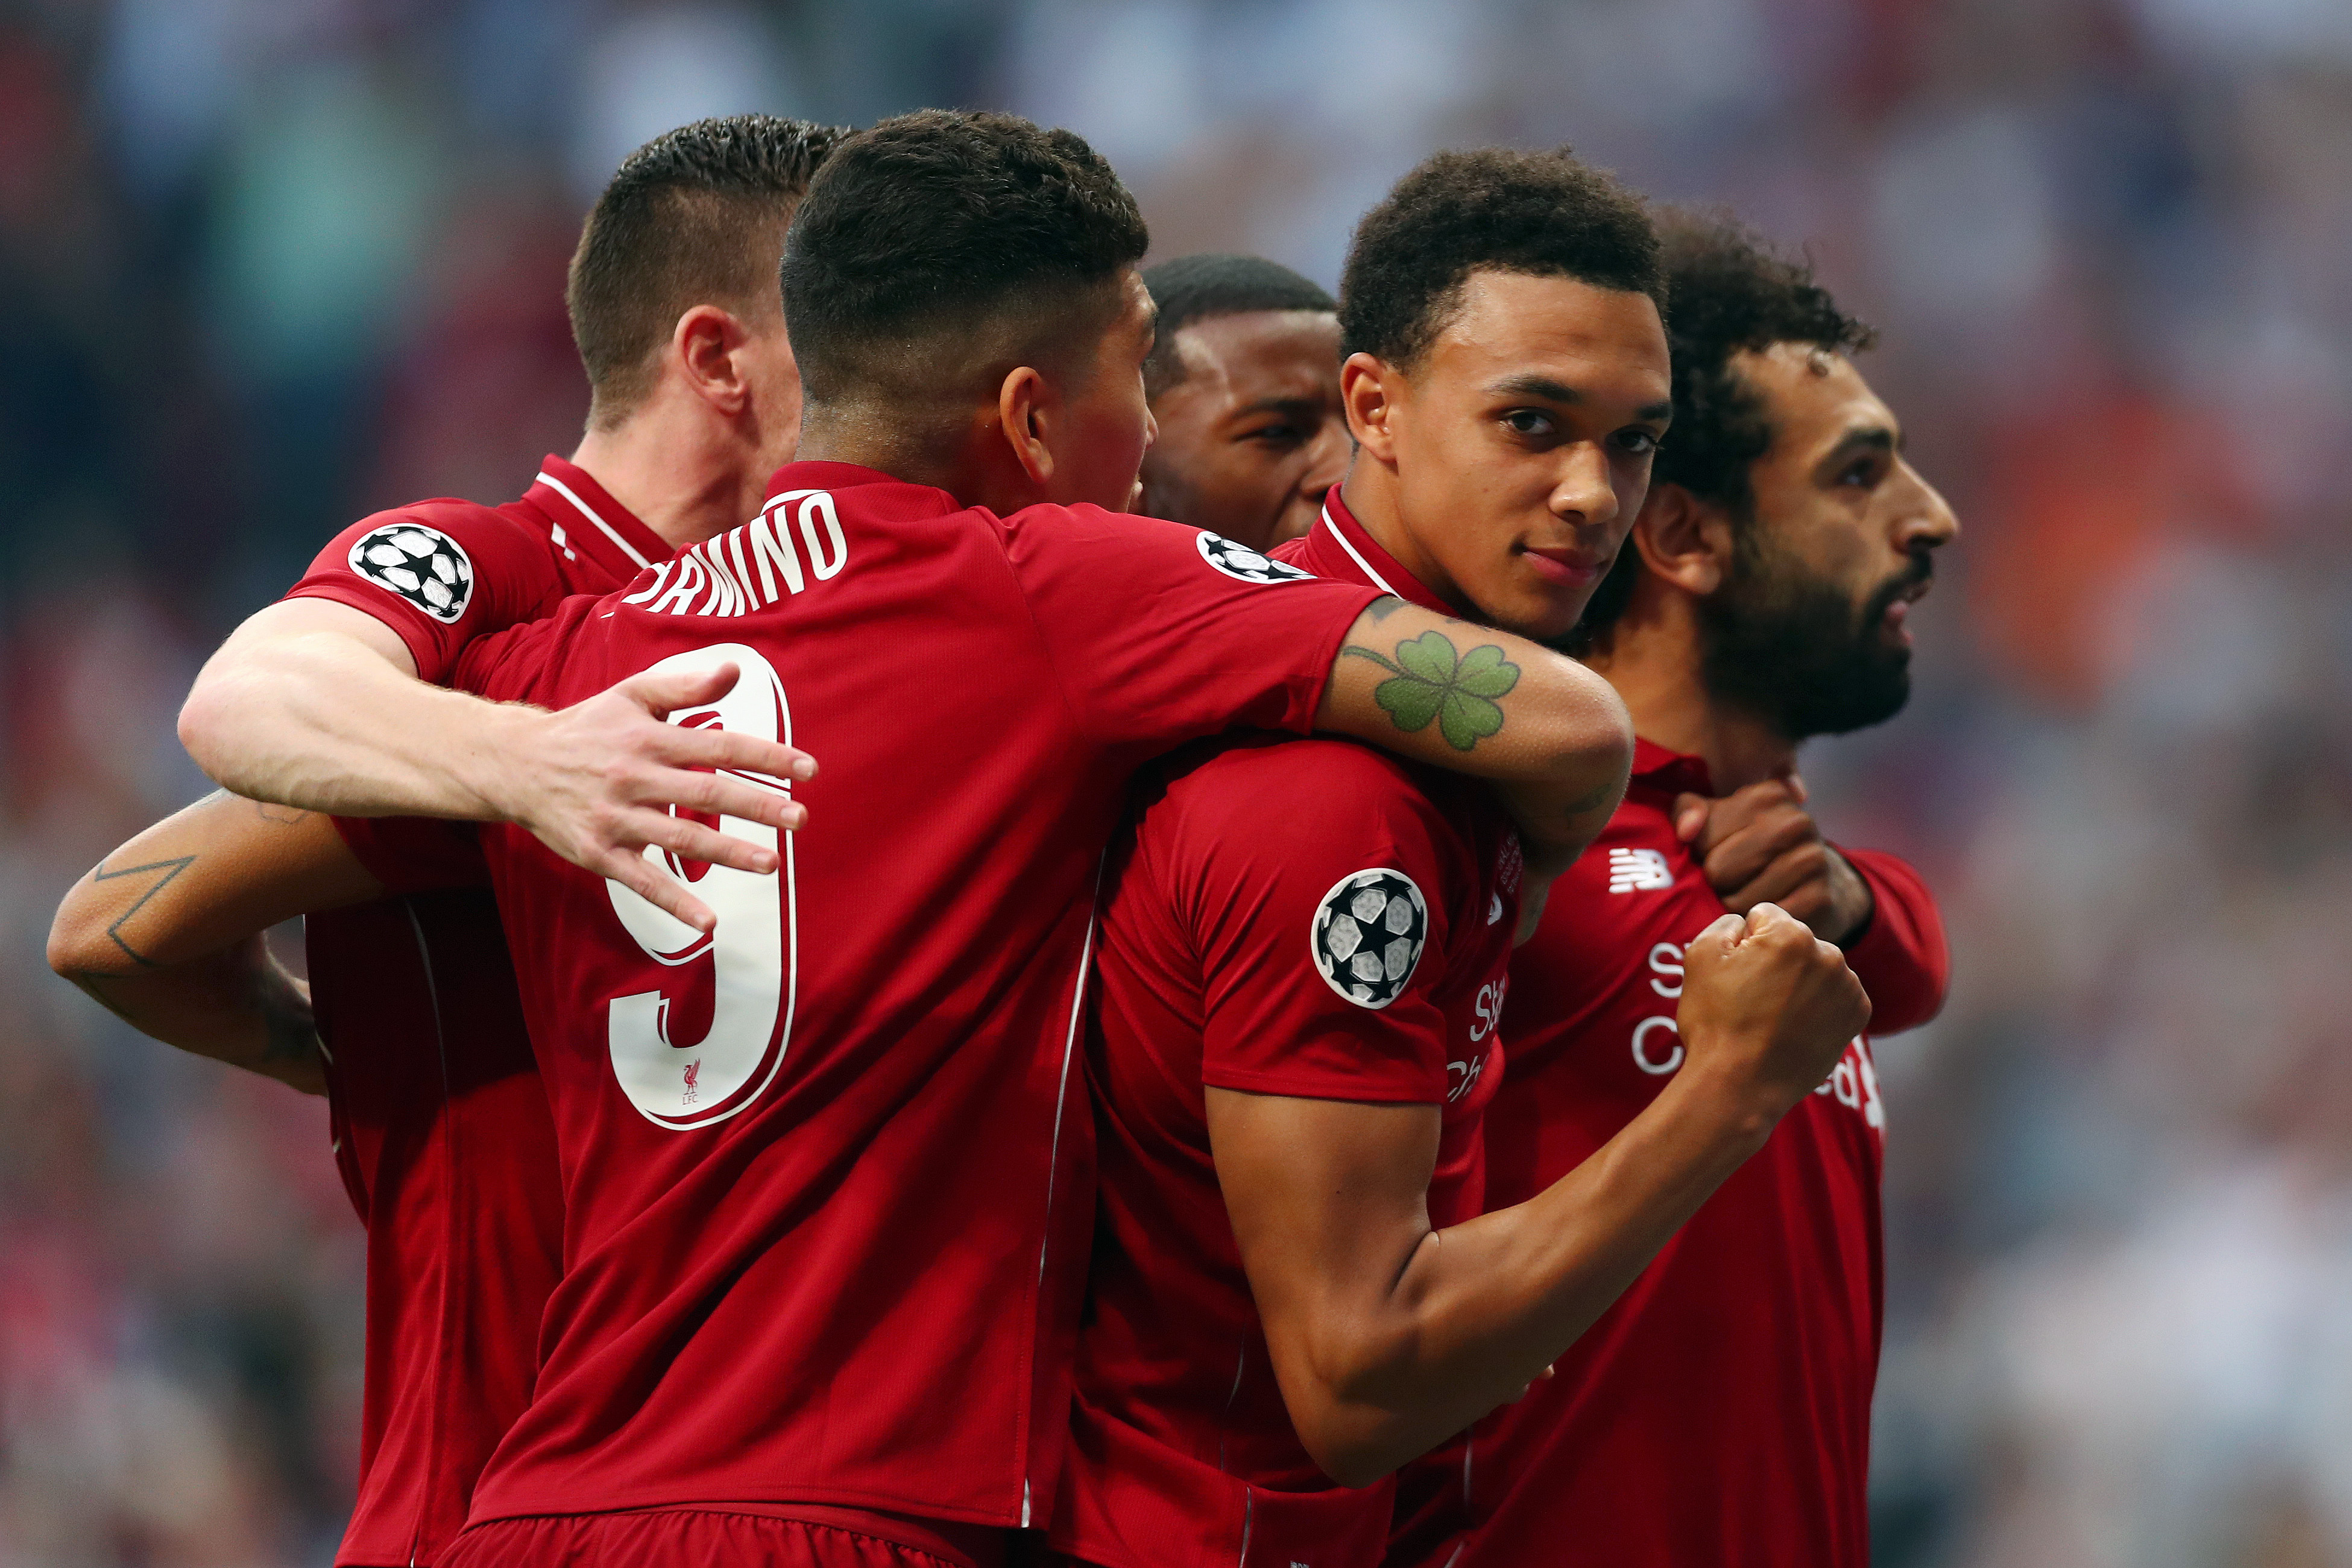 MADRID, SPAIN - JUNE 01: Mohamed Salah of Liverpool celebrates with teammates after scoring his team's first goal during the UEFA Champions League Final between Tottenham Hotspur and Liverpool at Estadio Wanda Metropolitano on June 01, 2019 in Madrid, Spain. (Photo by Clive Rose/Getty Images)